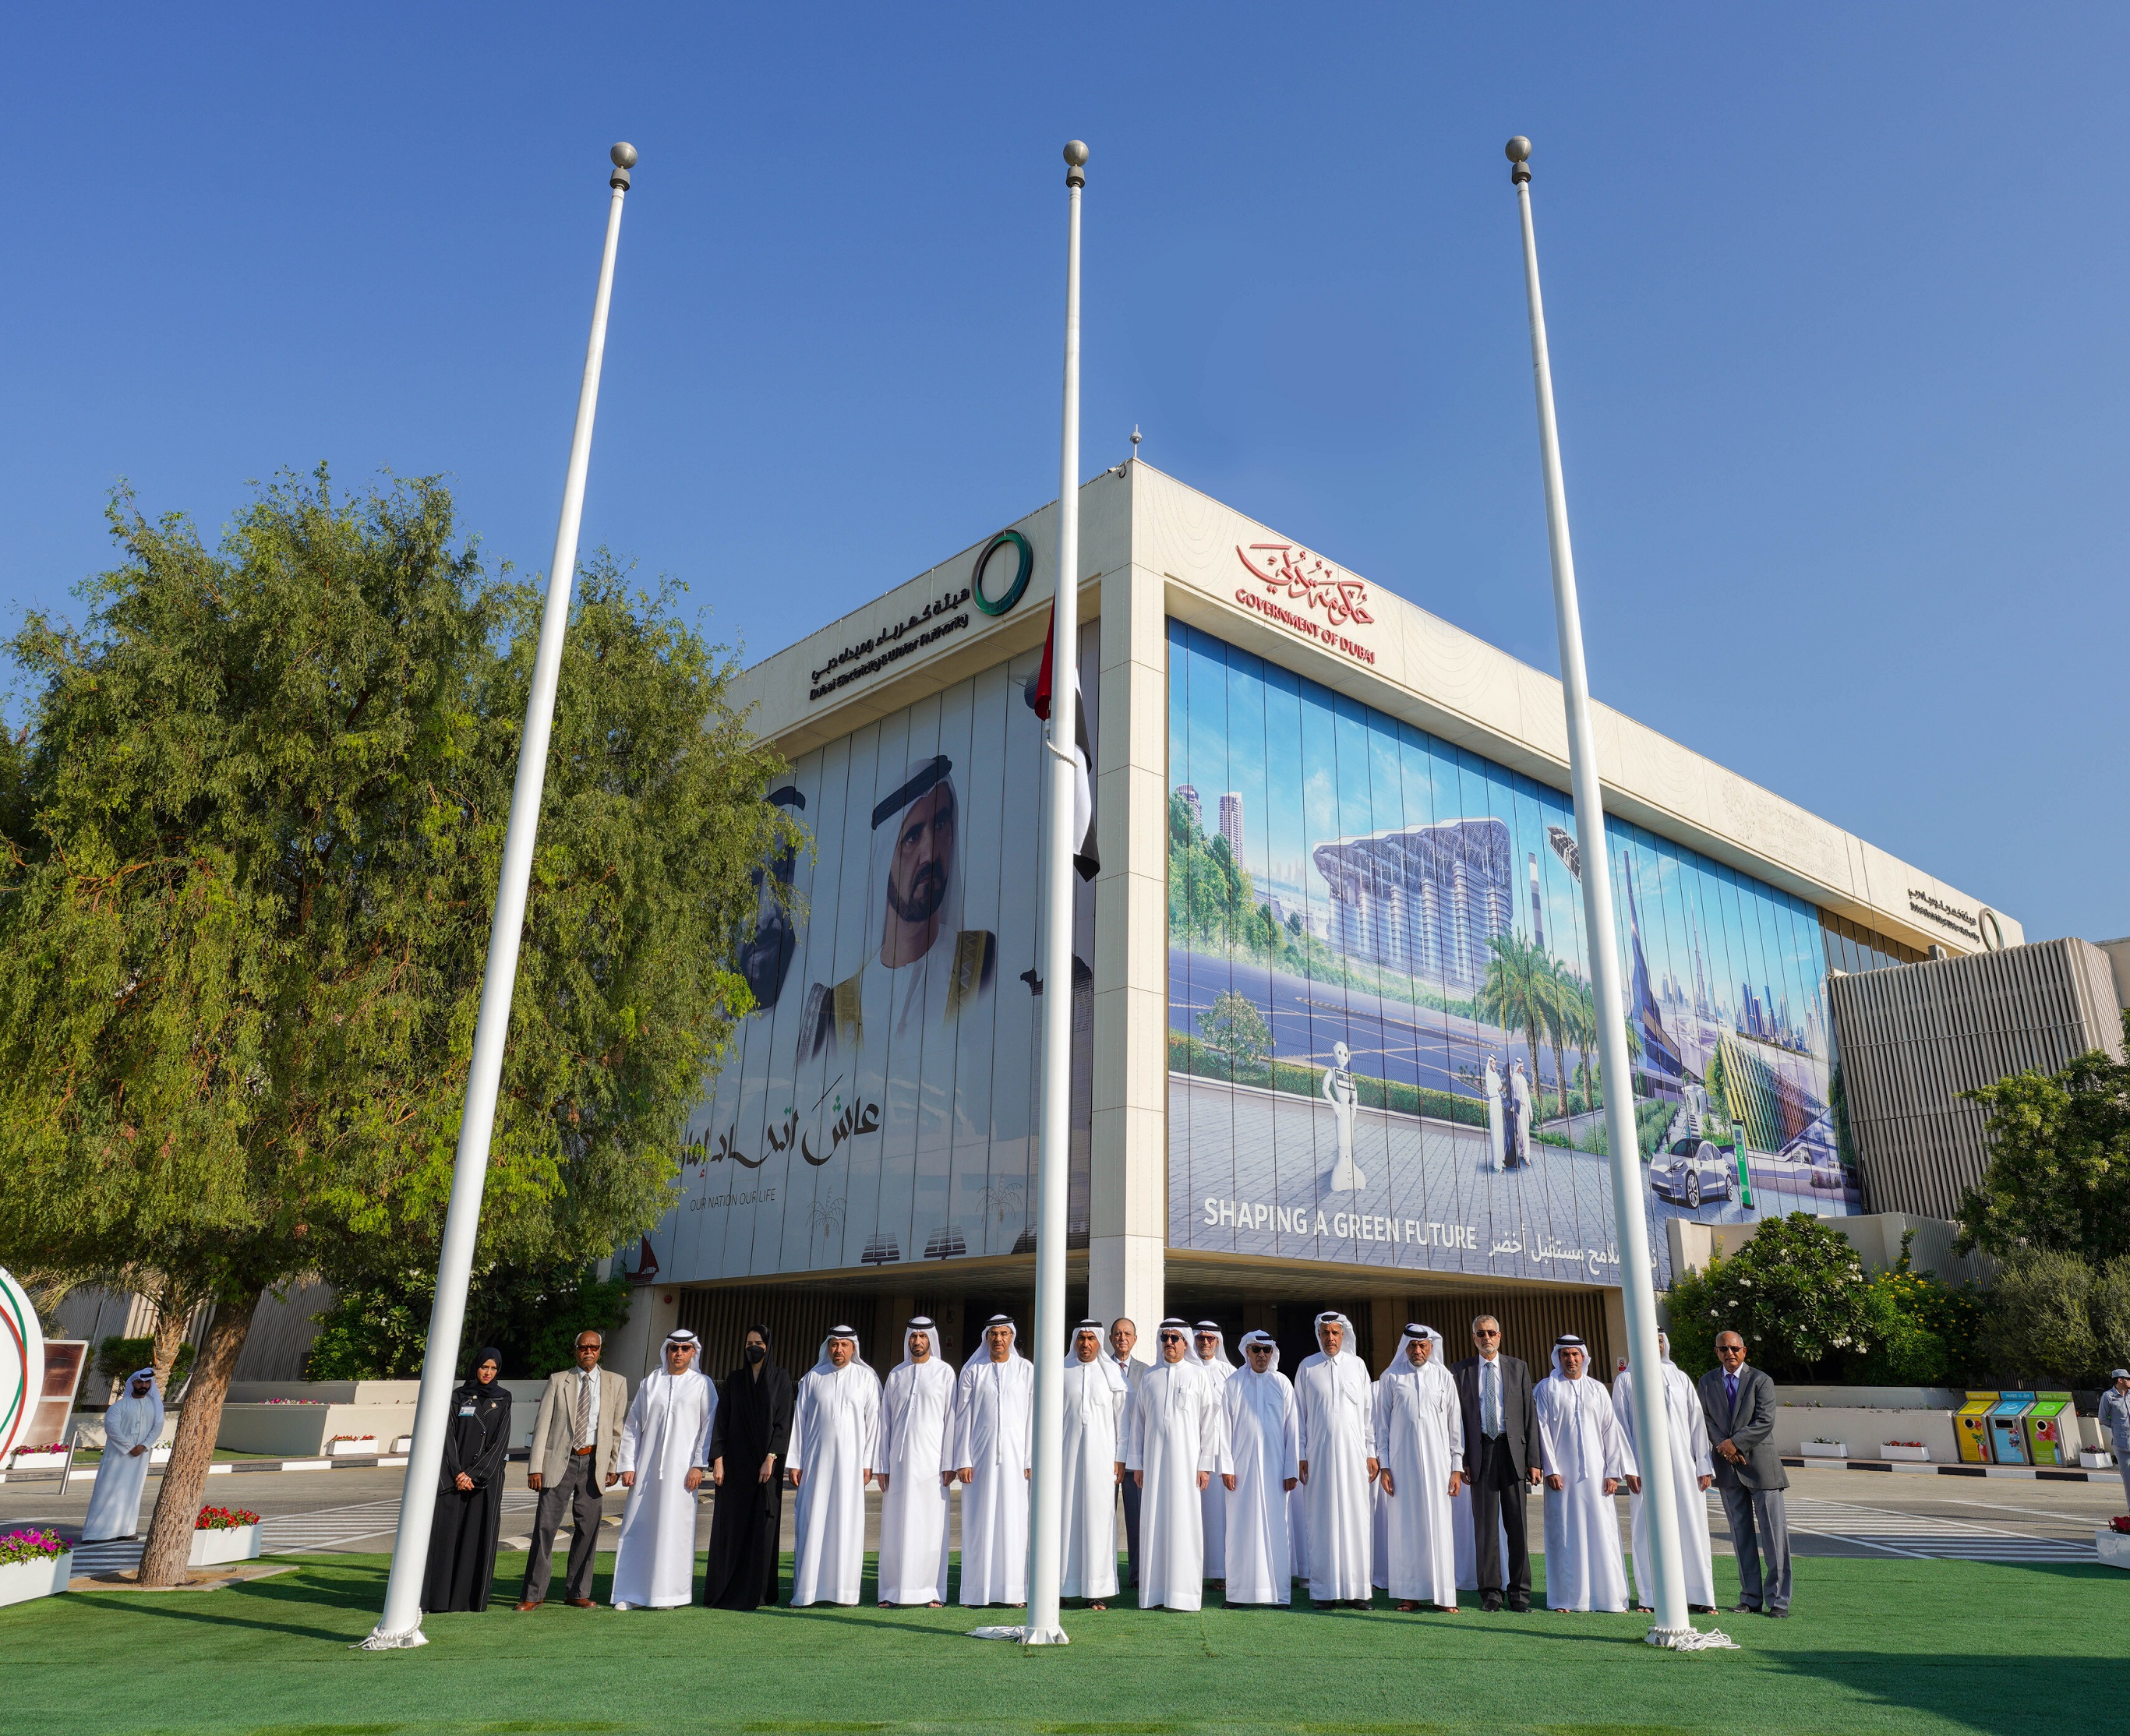 DEWA’s employees, officials mark Commemoration Day, acknowledge the martyrs’ sacrifices as a beacon for patriotism and belonging